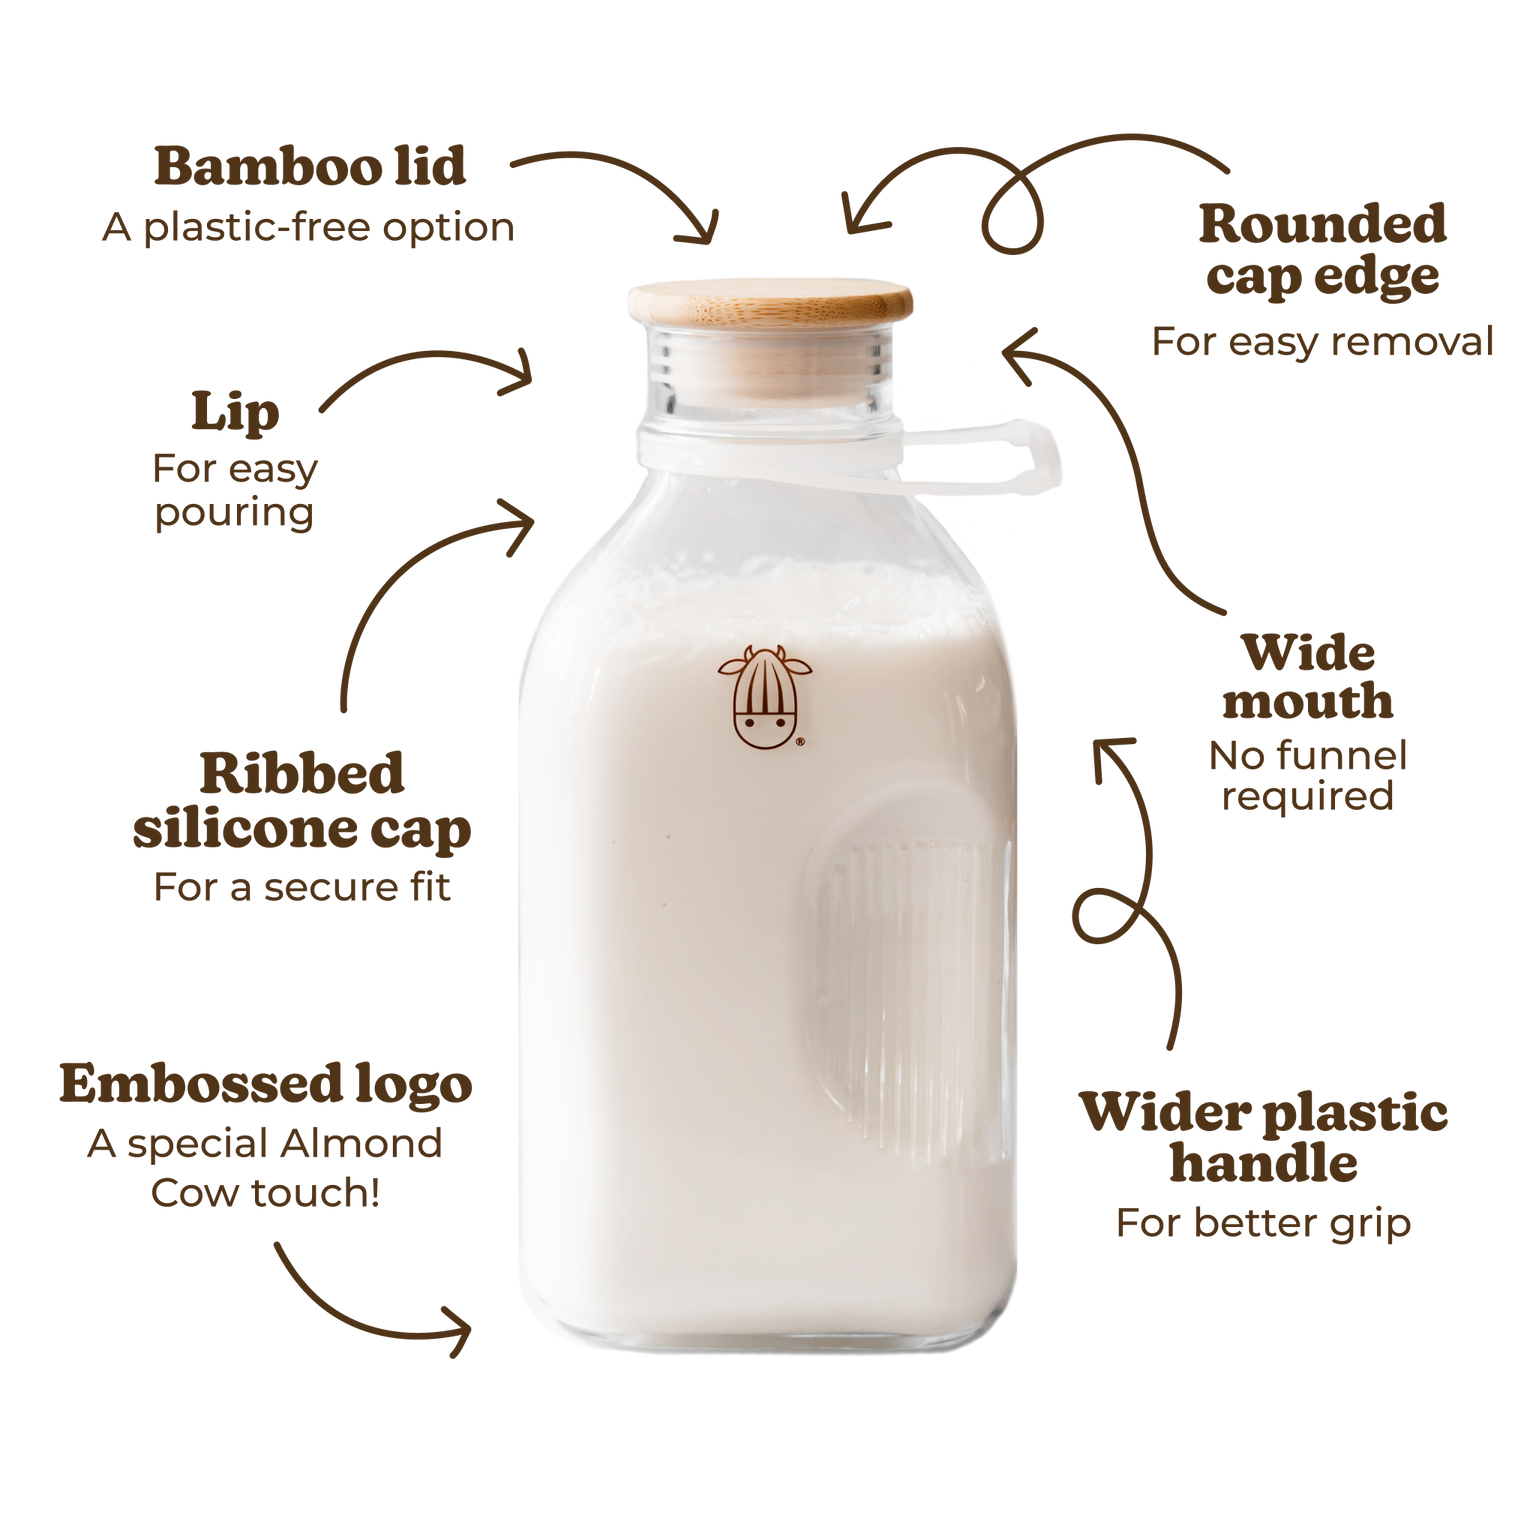 Almond Cow Glass Milk Jug - 60 Fluid Ounces | Perfect Milk Container Carafe for Refrigerator Fit - Glass Pitcher Milk Bottle - Food Grade Glass